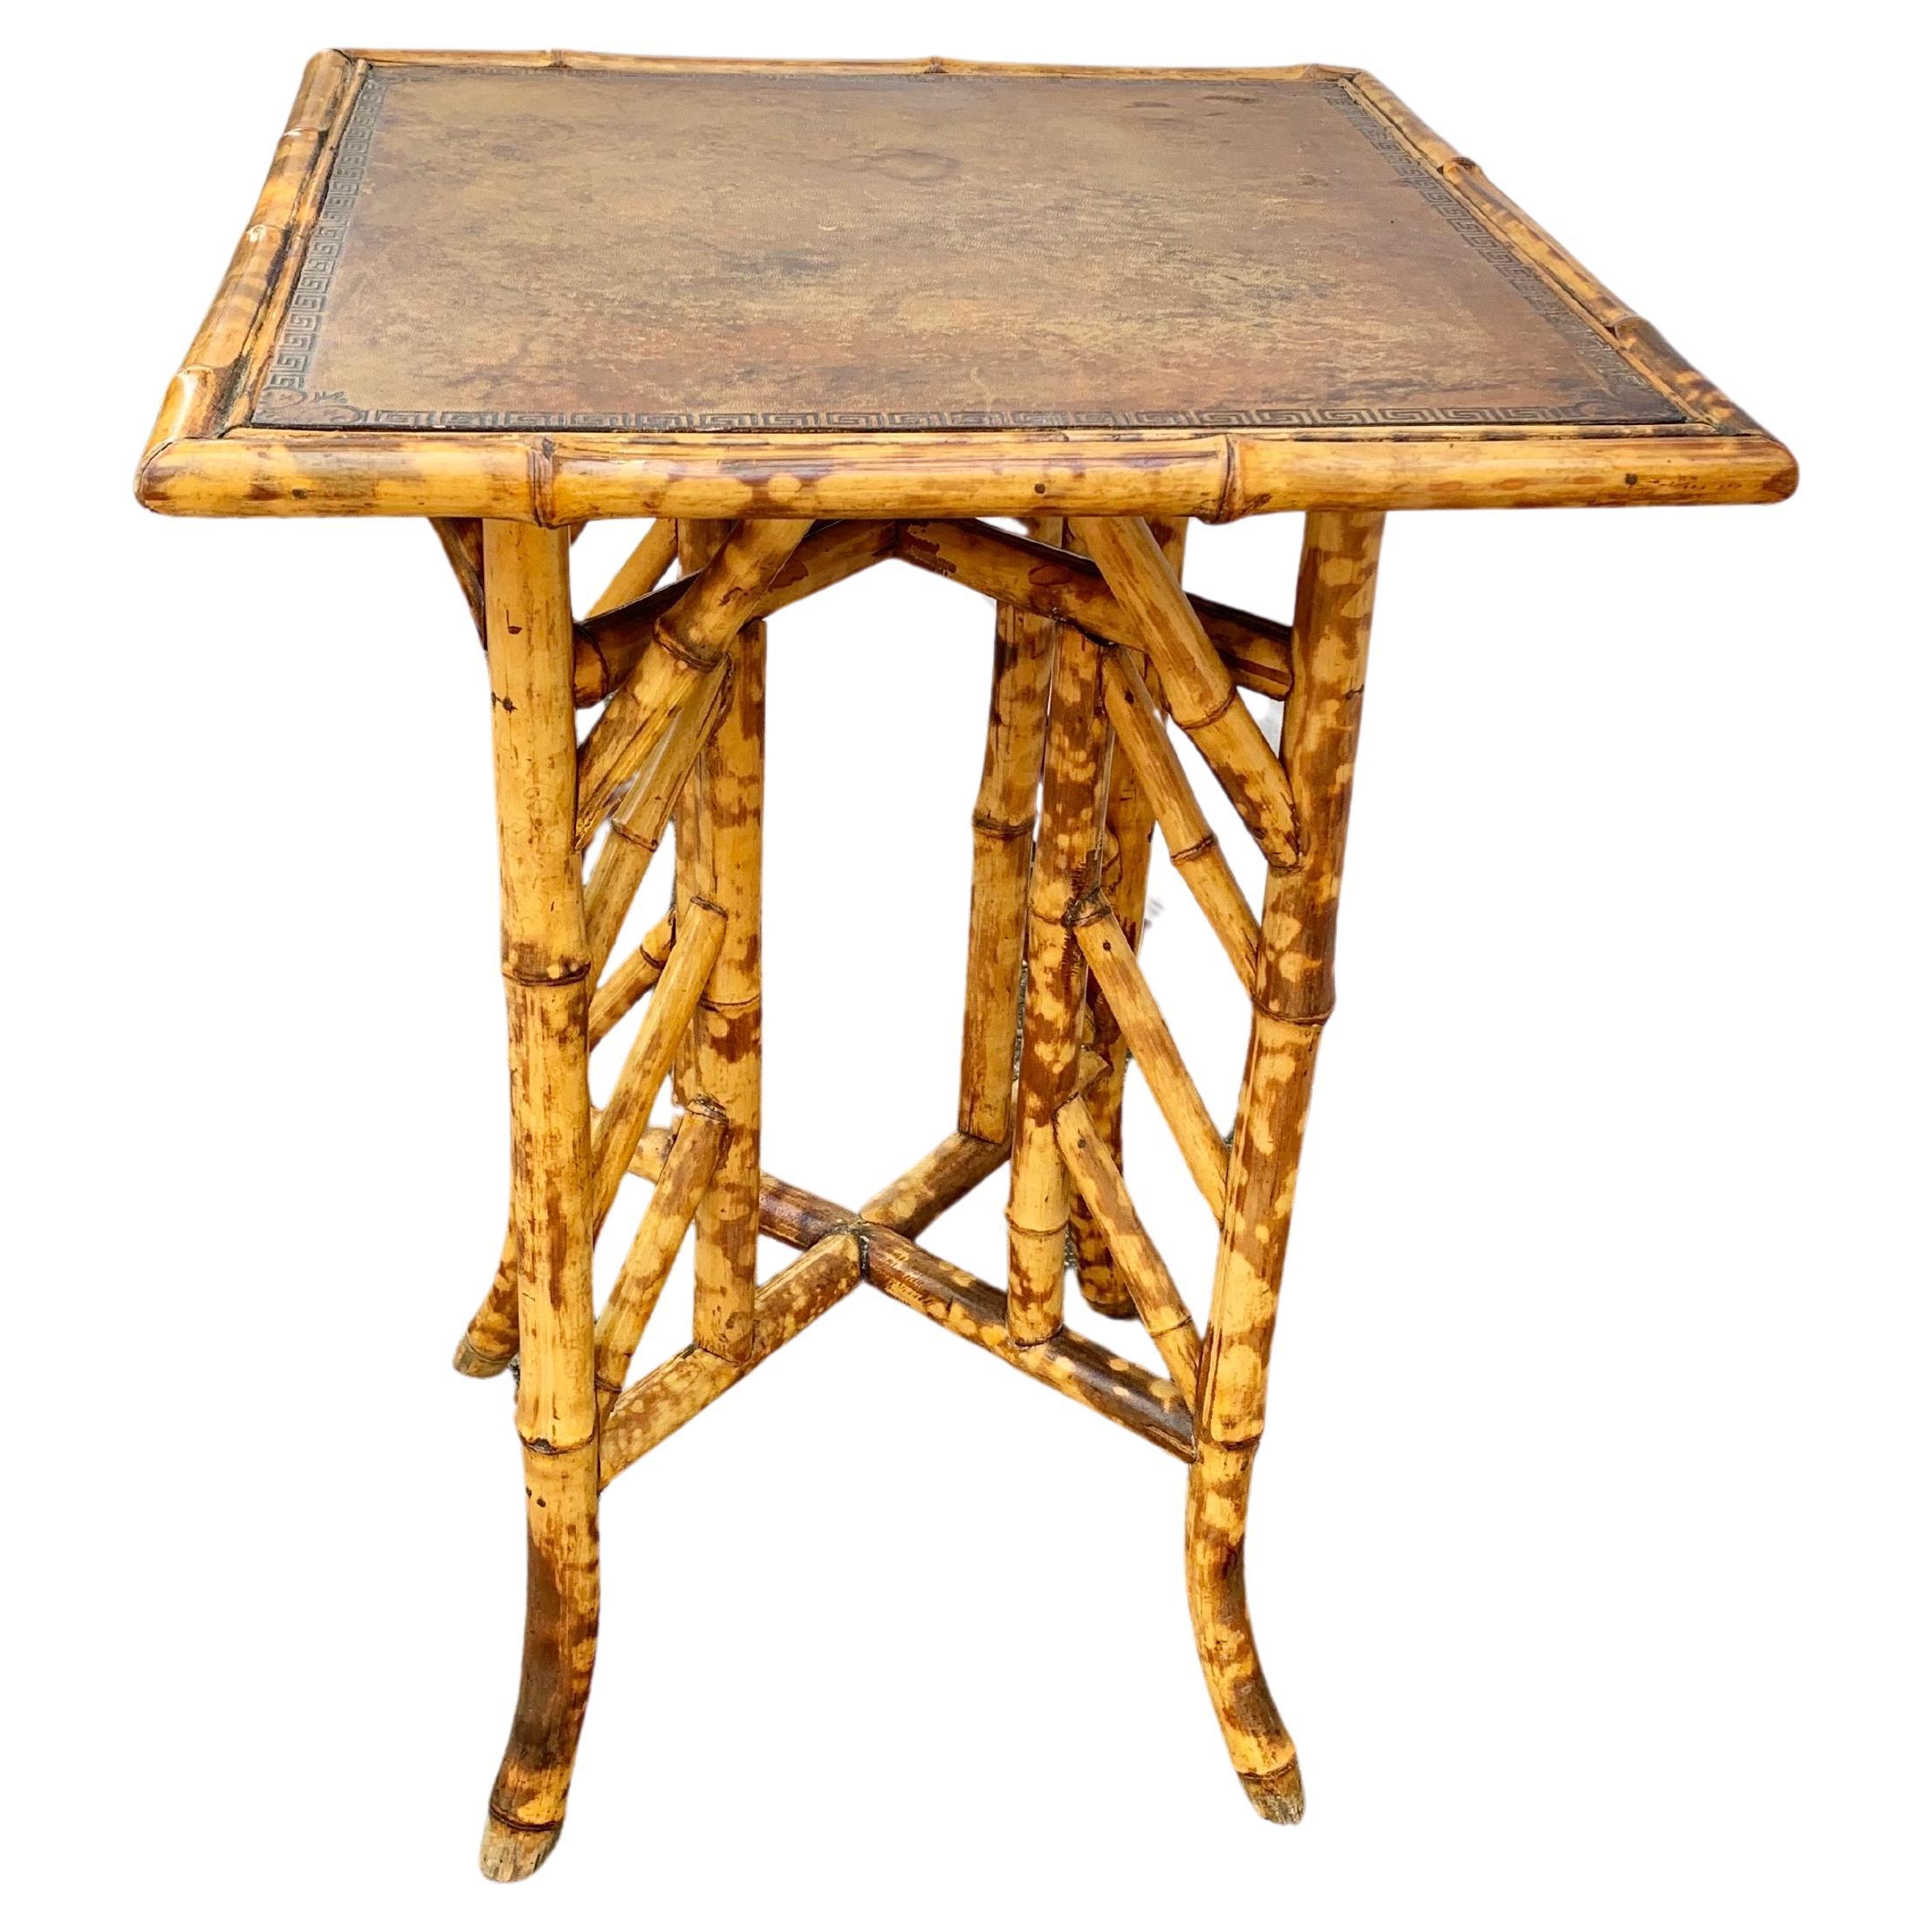 This 19th Century English aesthetic movement occasional or side table was handcrafted in the late 1800's from thick bamboo. The table features a square embossed brown leather top resting on four gently splayed legs that have been conjoined with